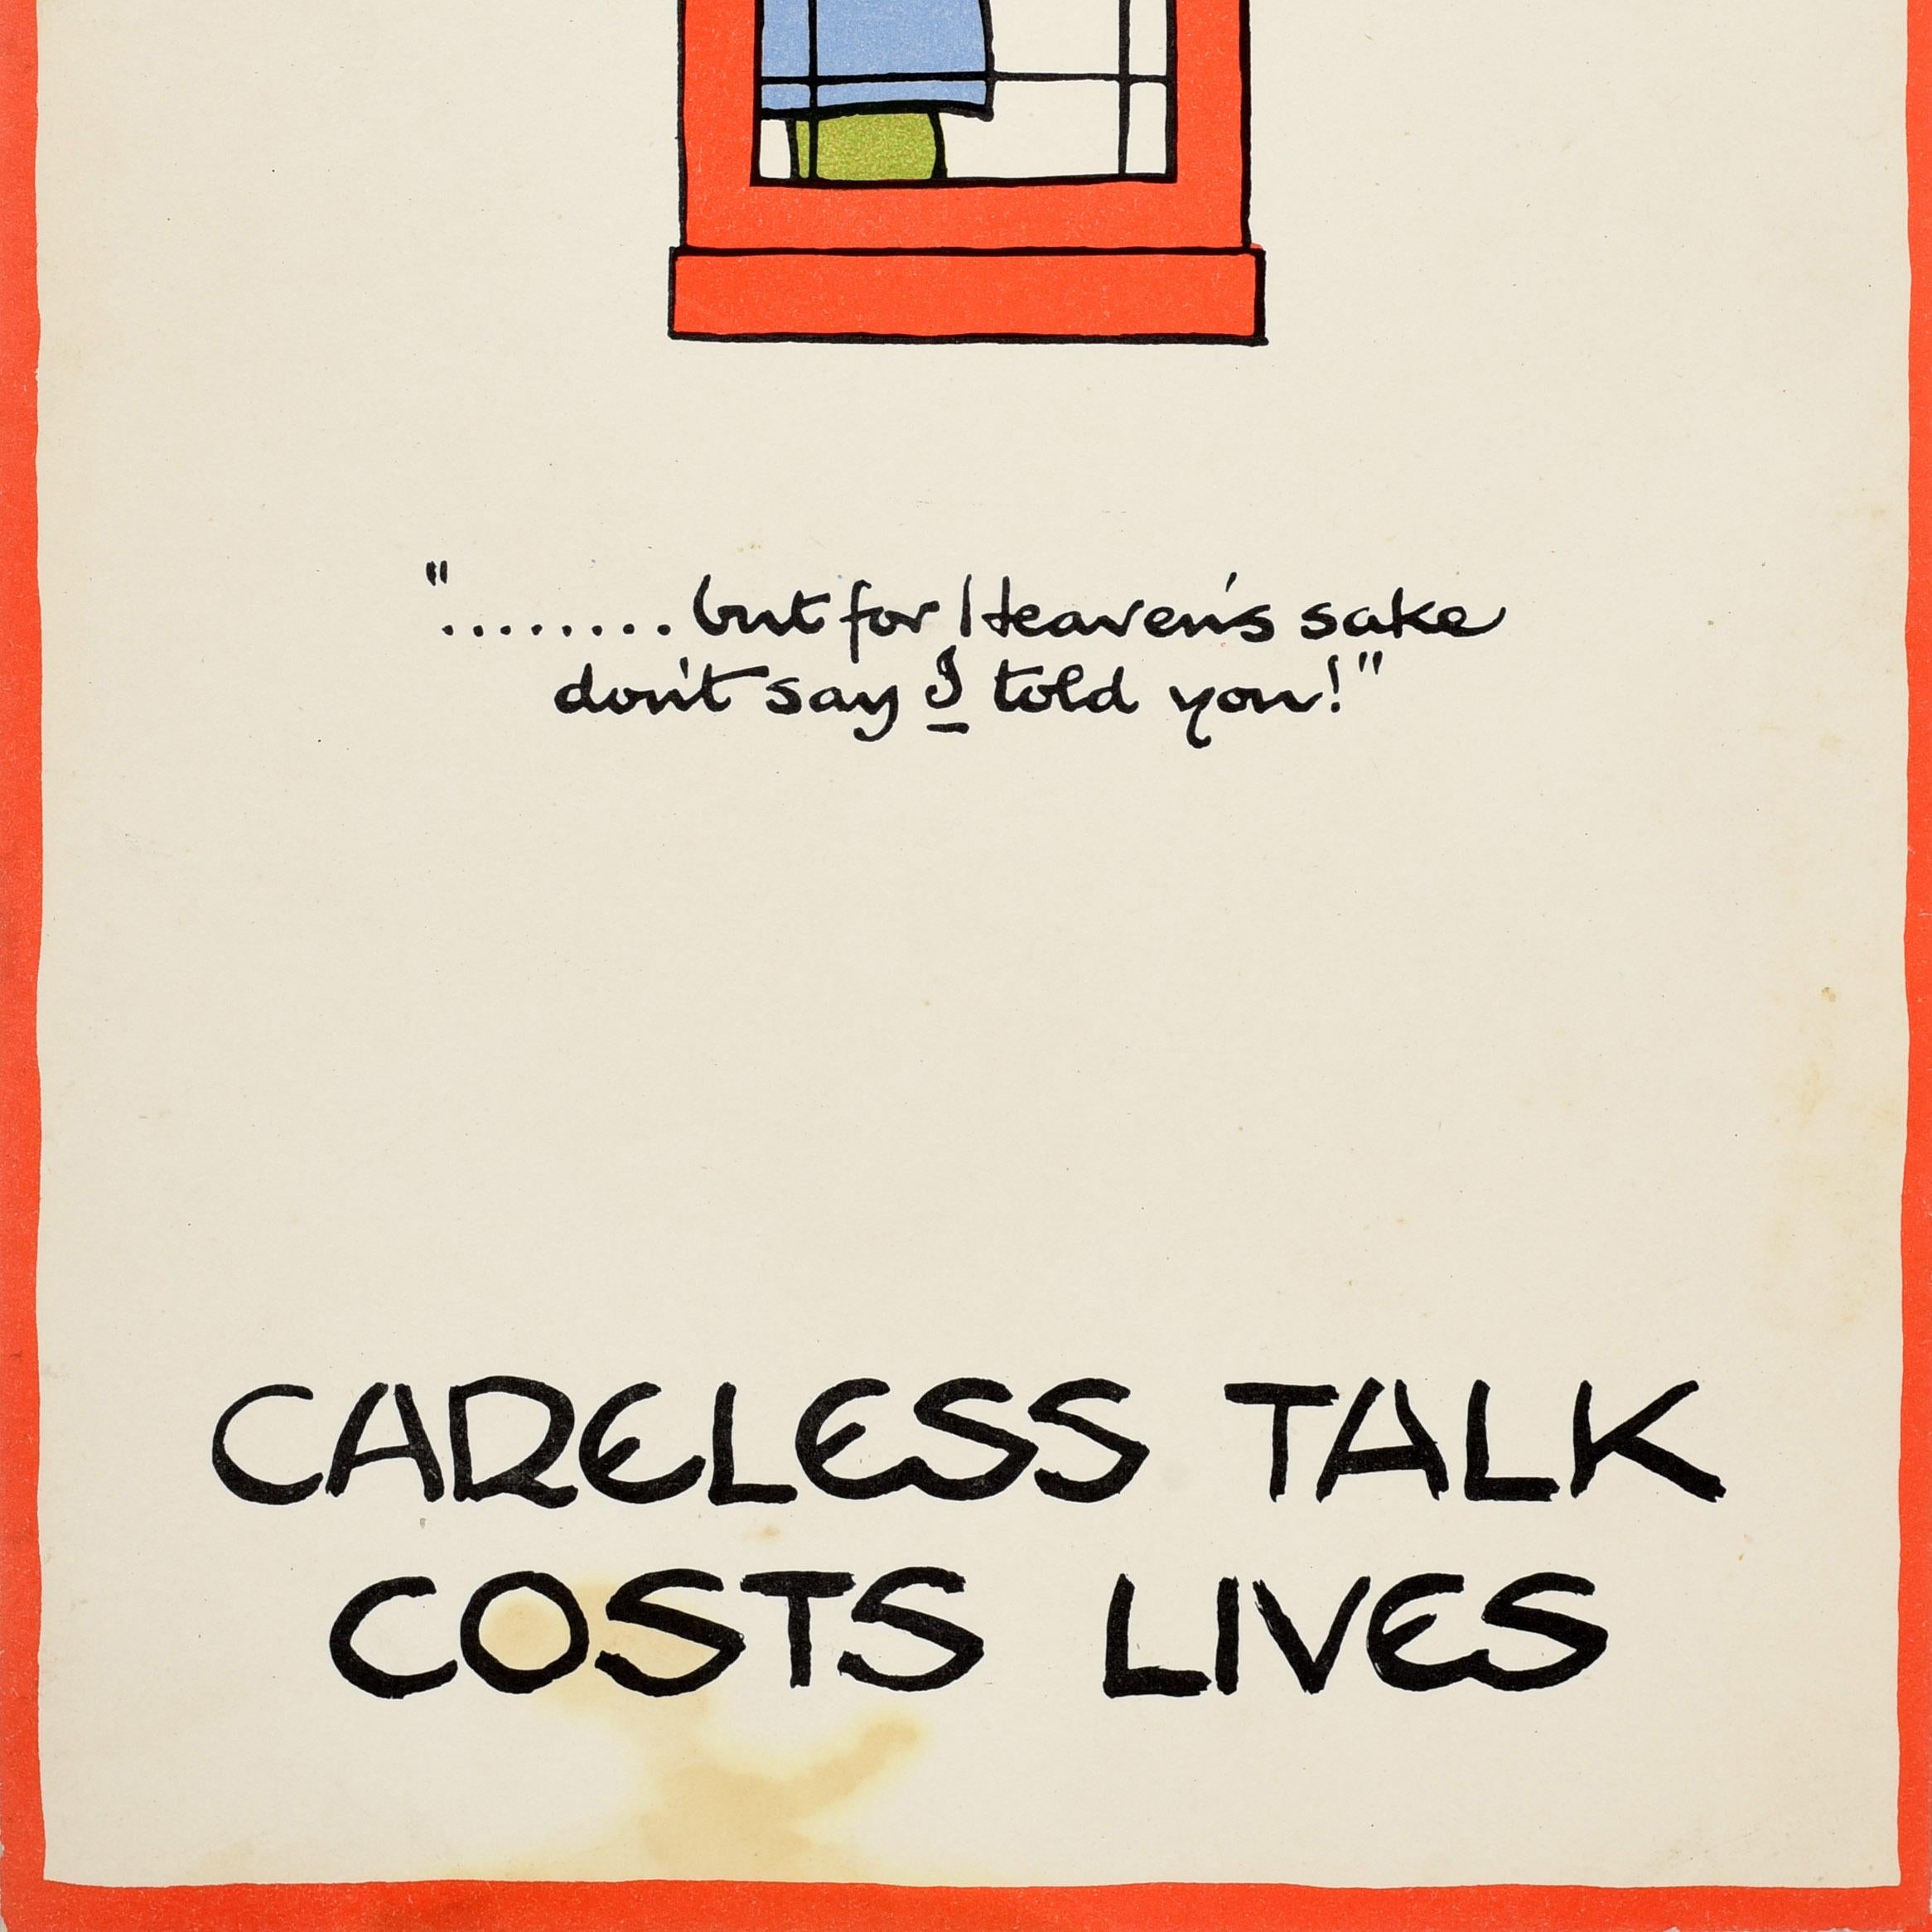 Original Vintage WWII Poster Careless Talk Costs Lives Telephone Box Fougasse - Beige Print by Fougasse (Cyril Kenneth Bird)